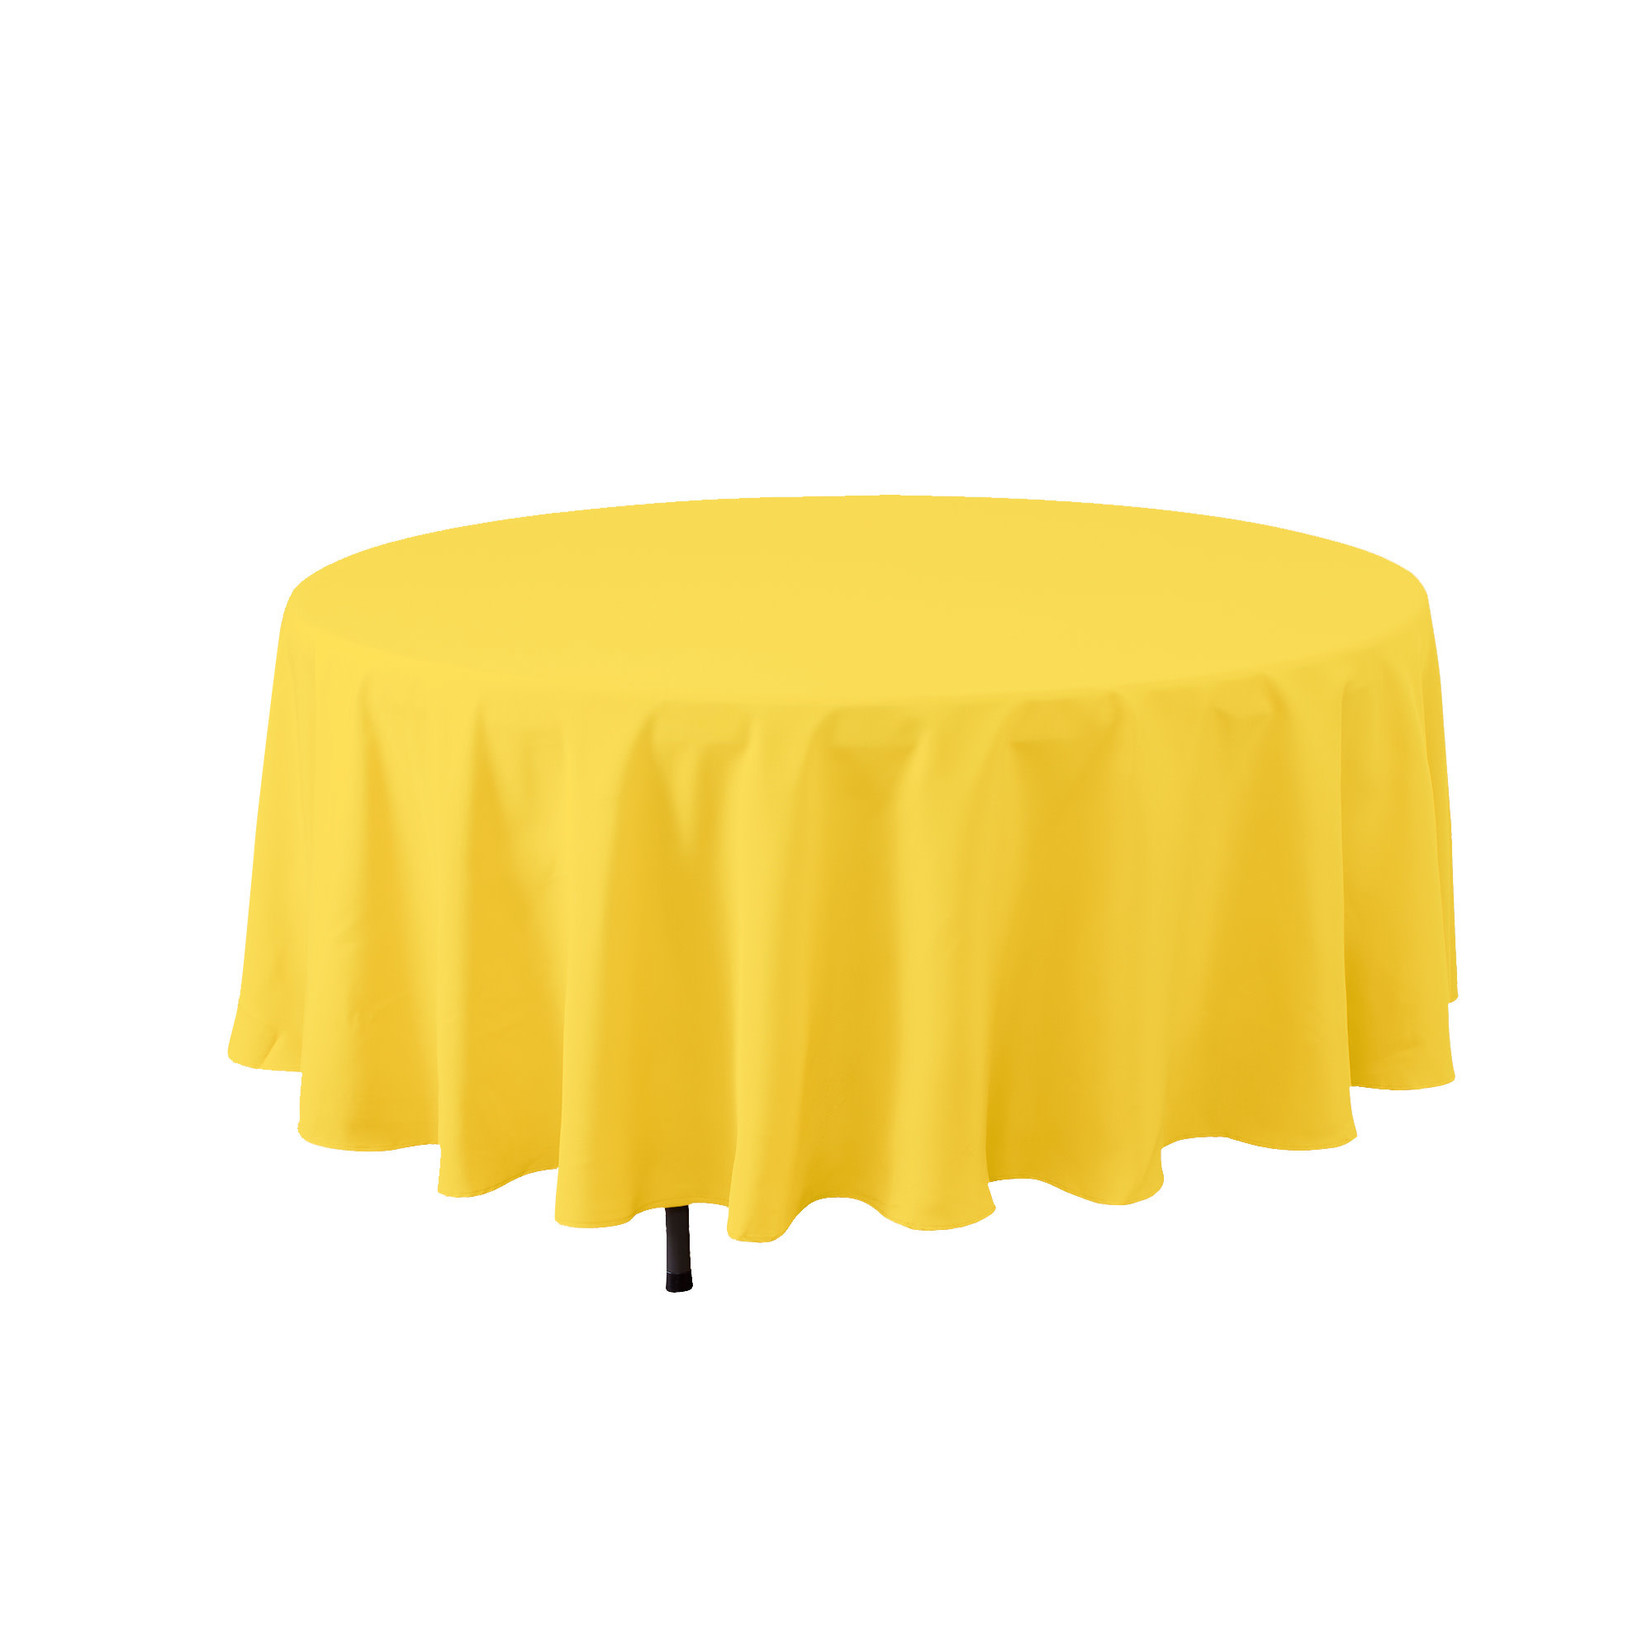 YELLOW ROUND POLYESTER TABLE COVER 108"